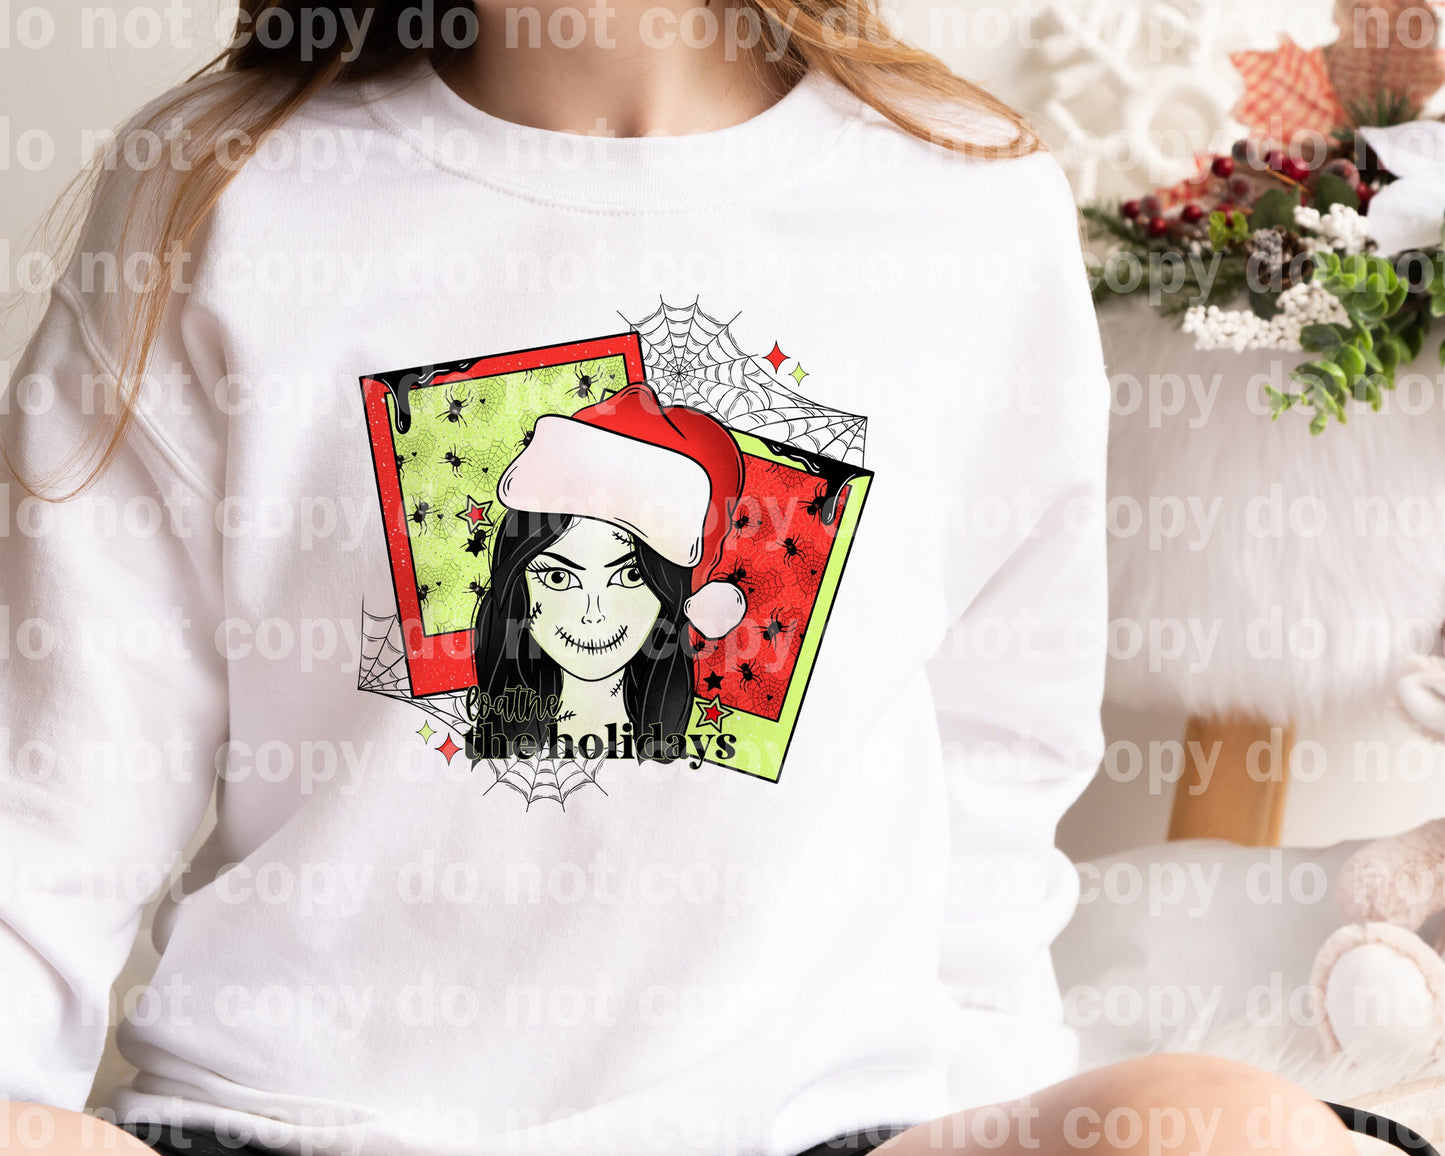 Loathe The Holidays Polaroid Wave Hair with Optional Two Rows Sleeve Designs Dream Print or Sublimation Print